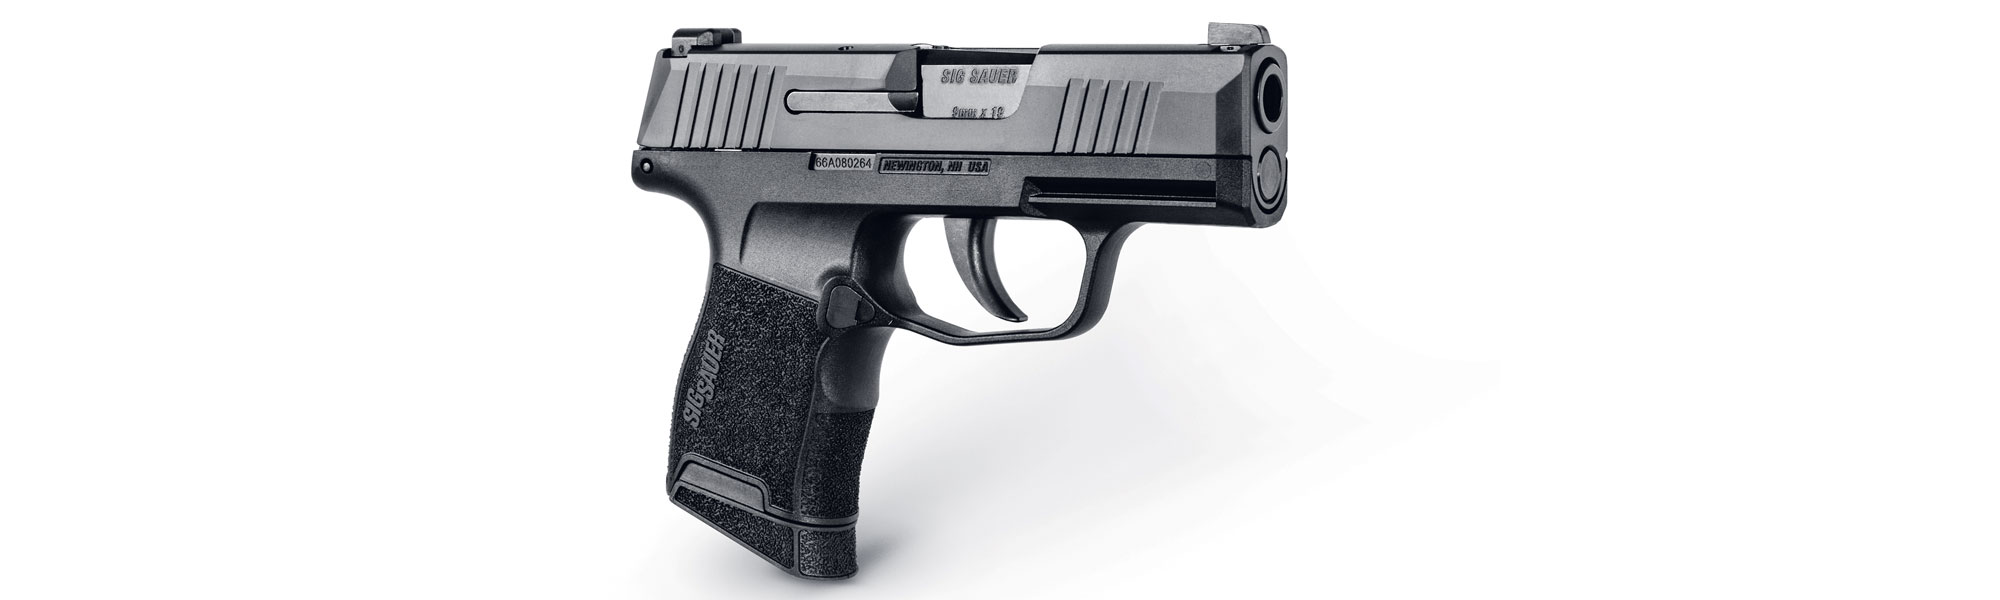 The P365 micro-compact pistol is featured to show its concealable size and high capacity.